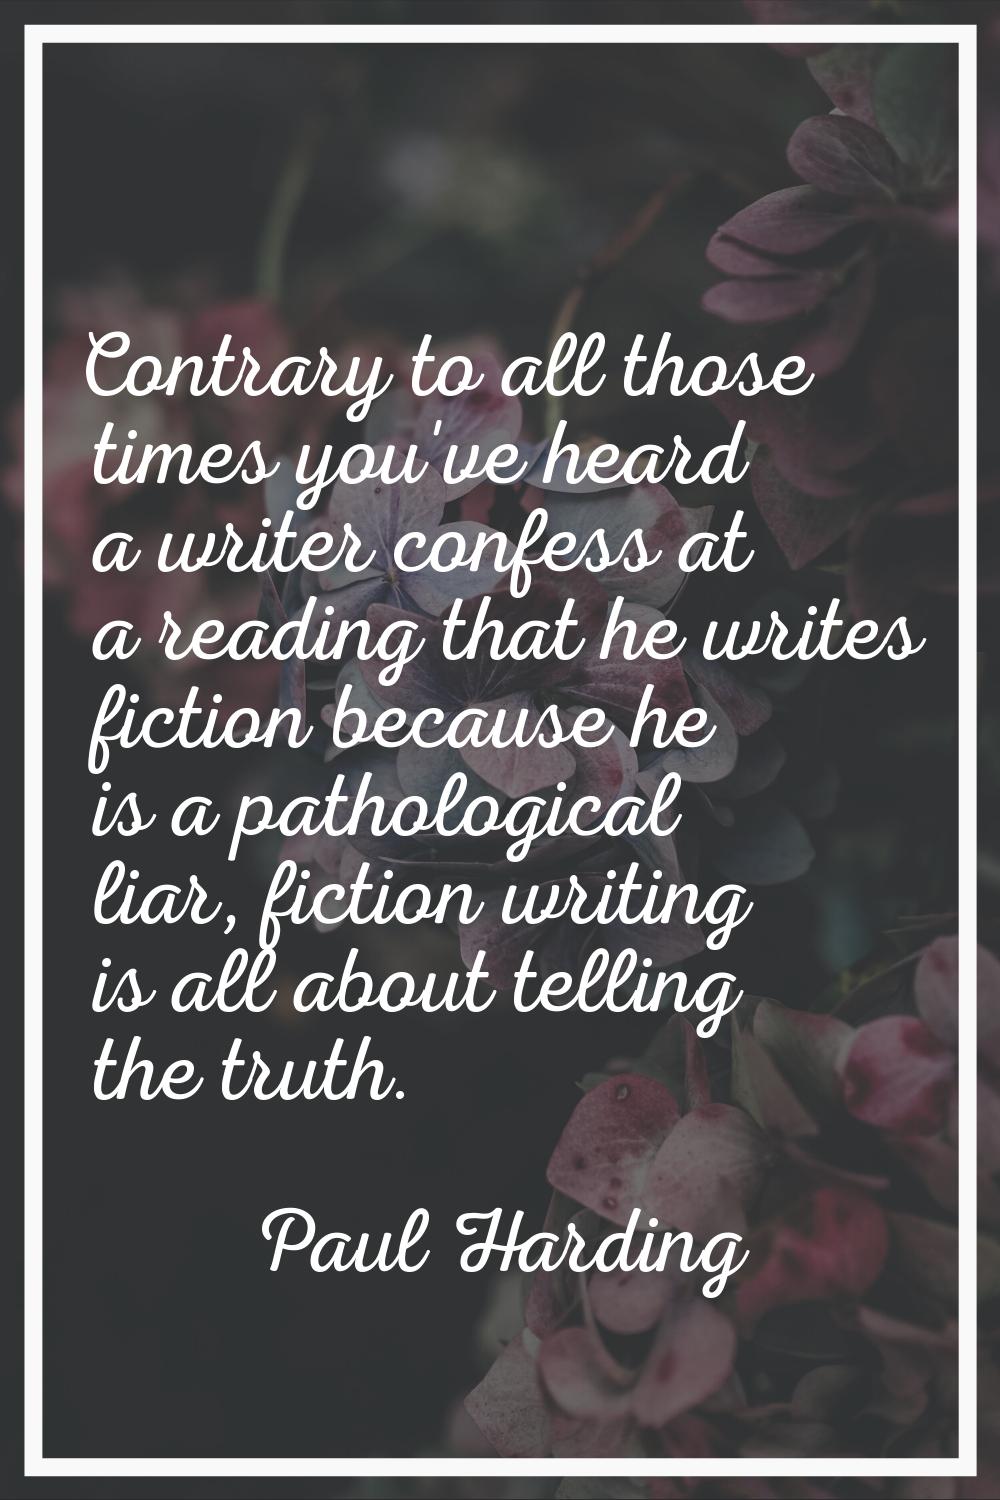 Contrary to all those times you've heard a writer confess at a reading that he writes fiction becau